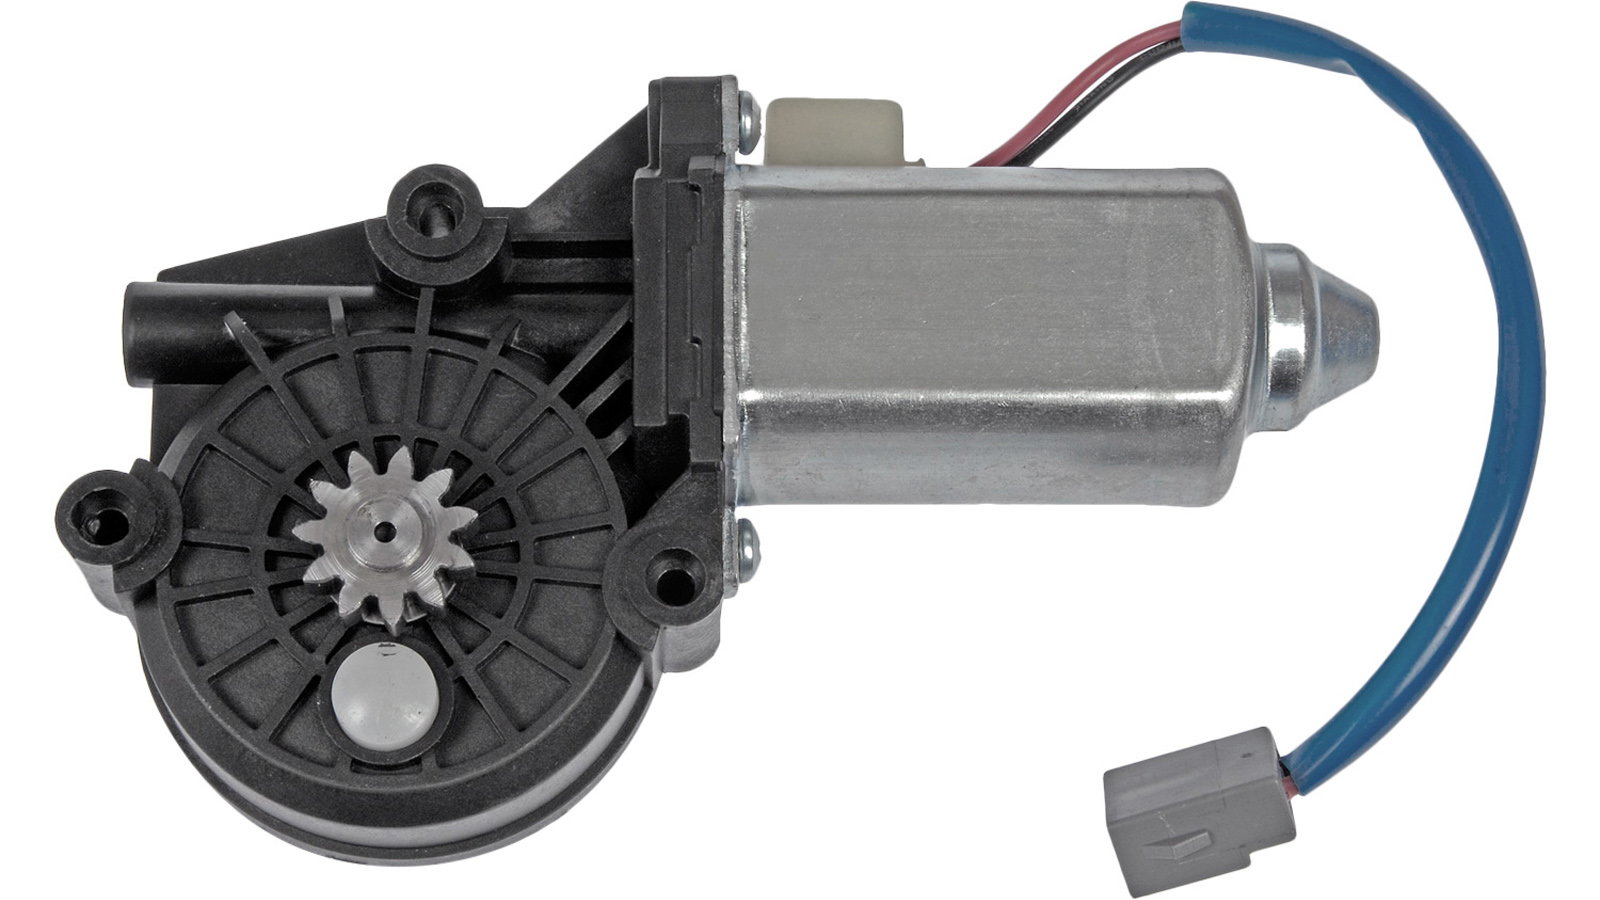 Details about   For Ford F-150 85-91 Power Window Motor Reman Remanufactured Front Passenger